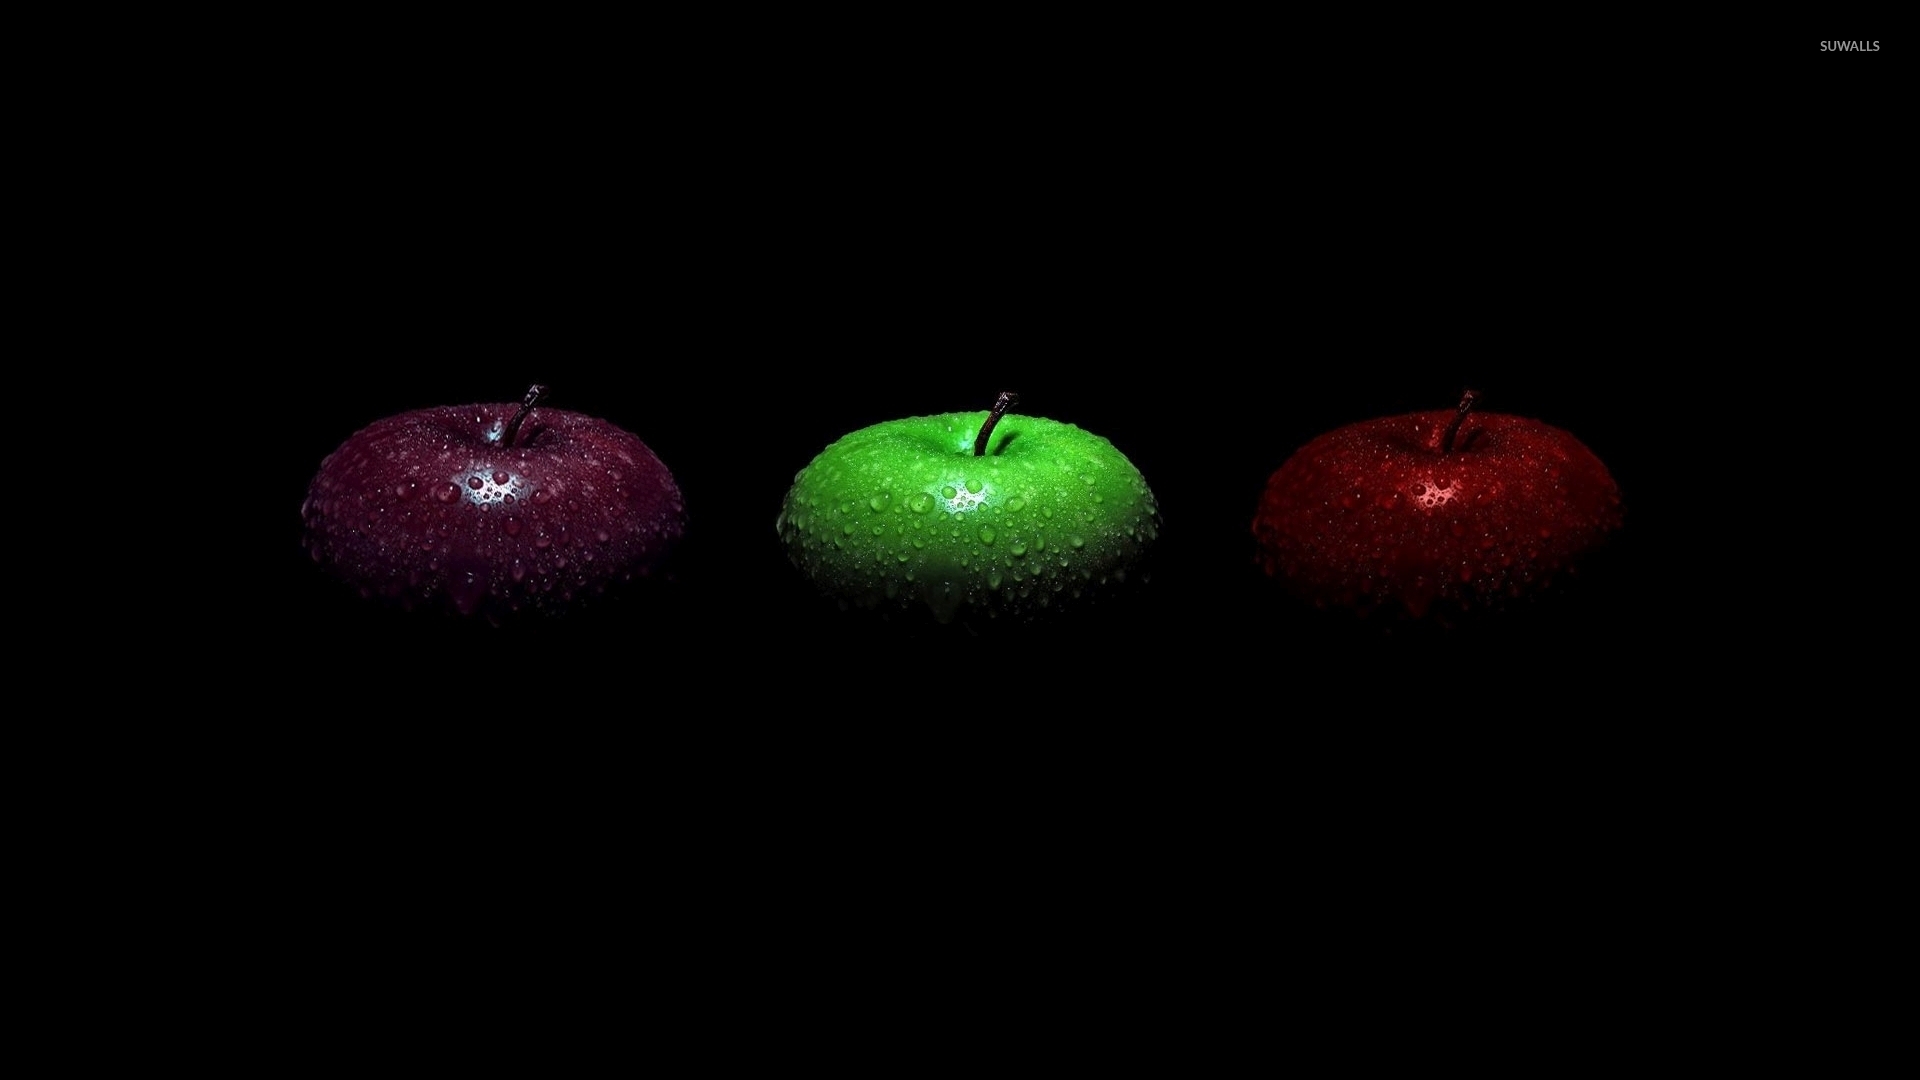 Apples With Water Drops Wallpaper